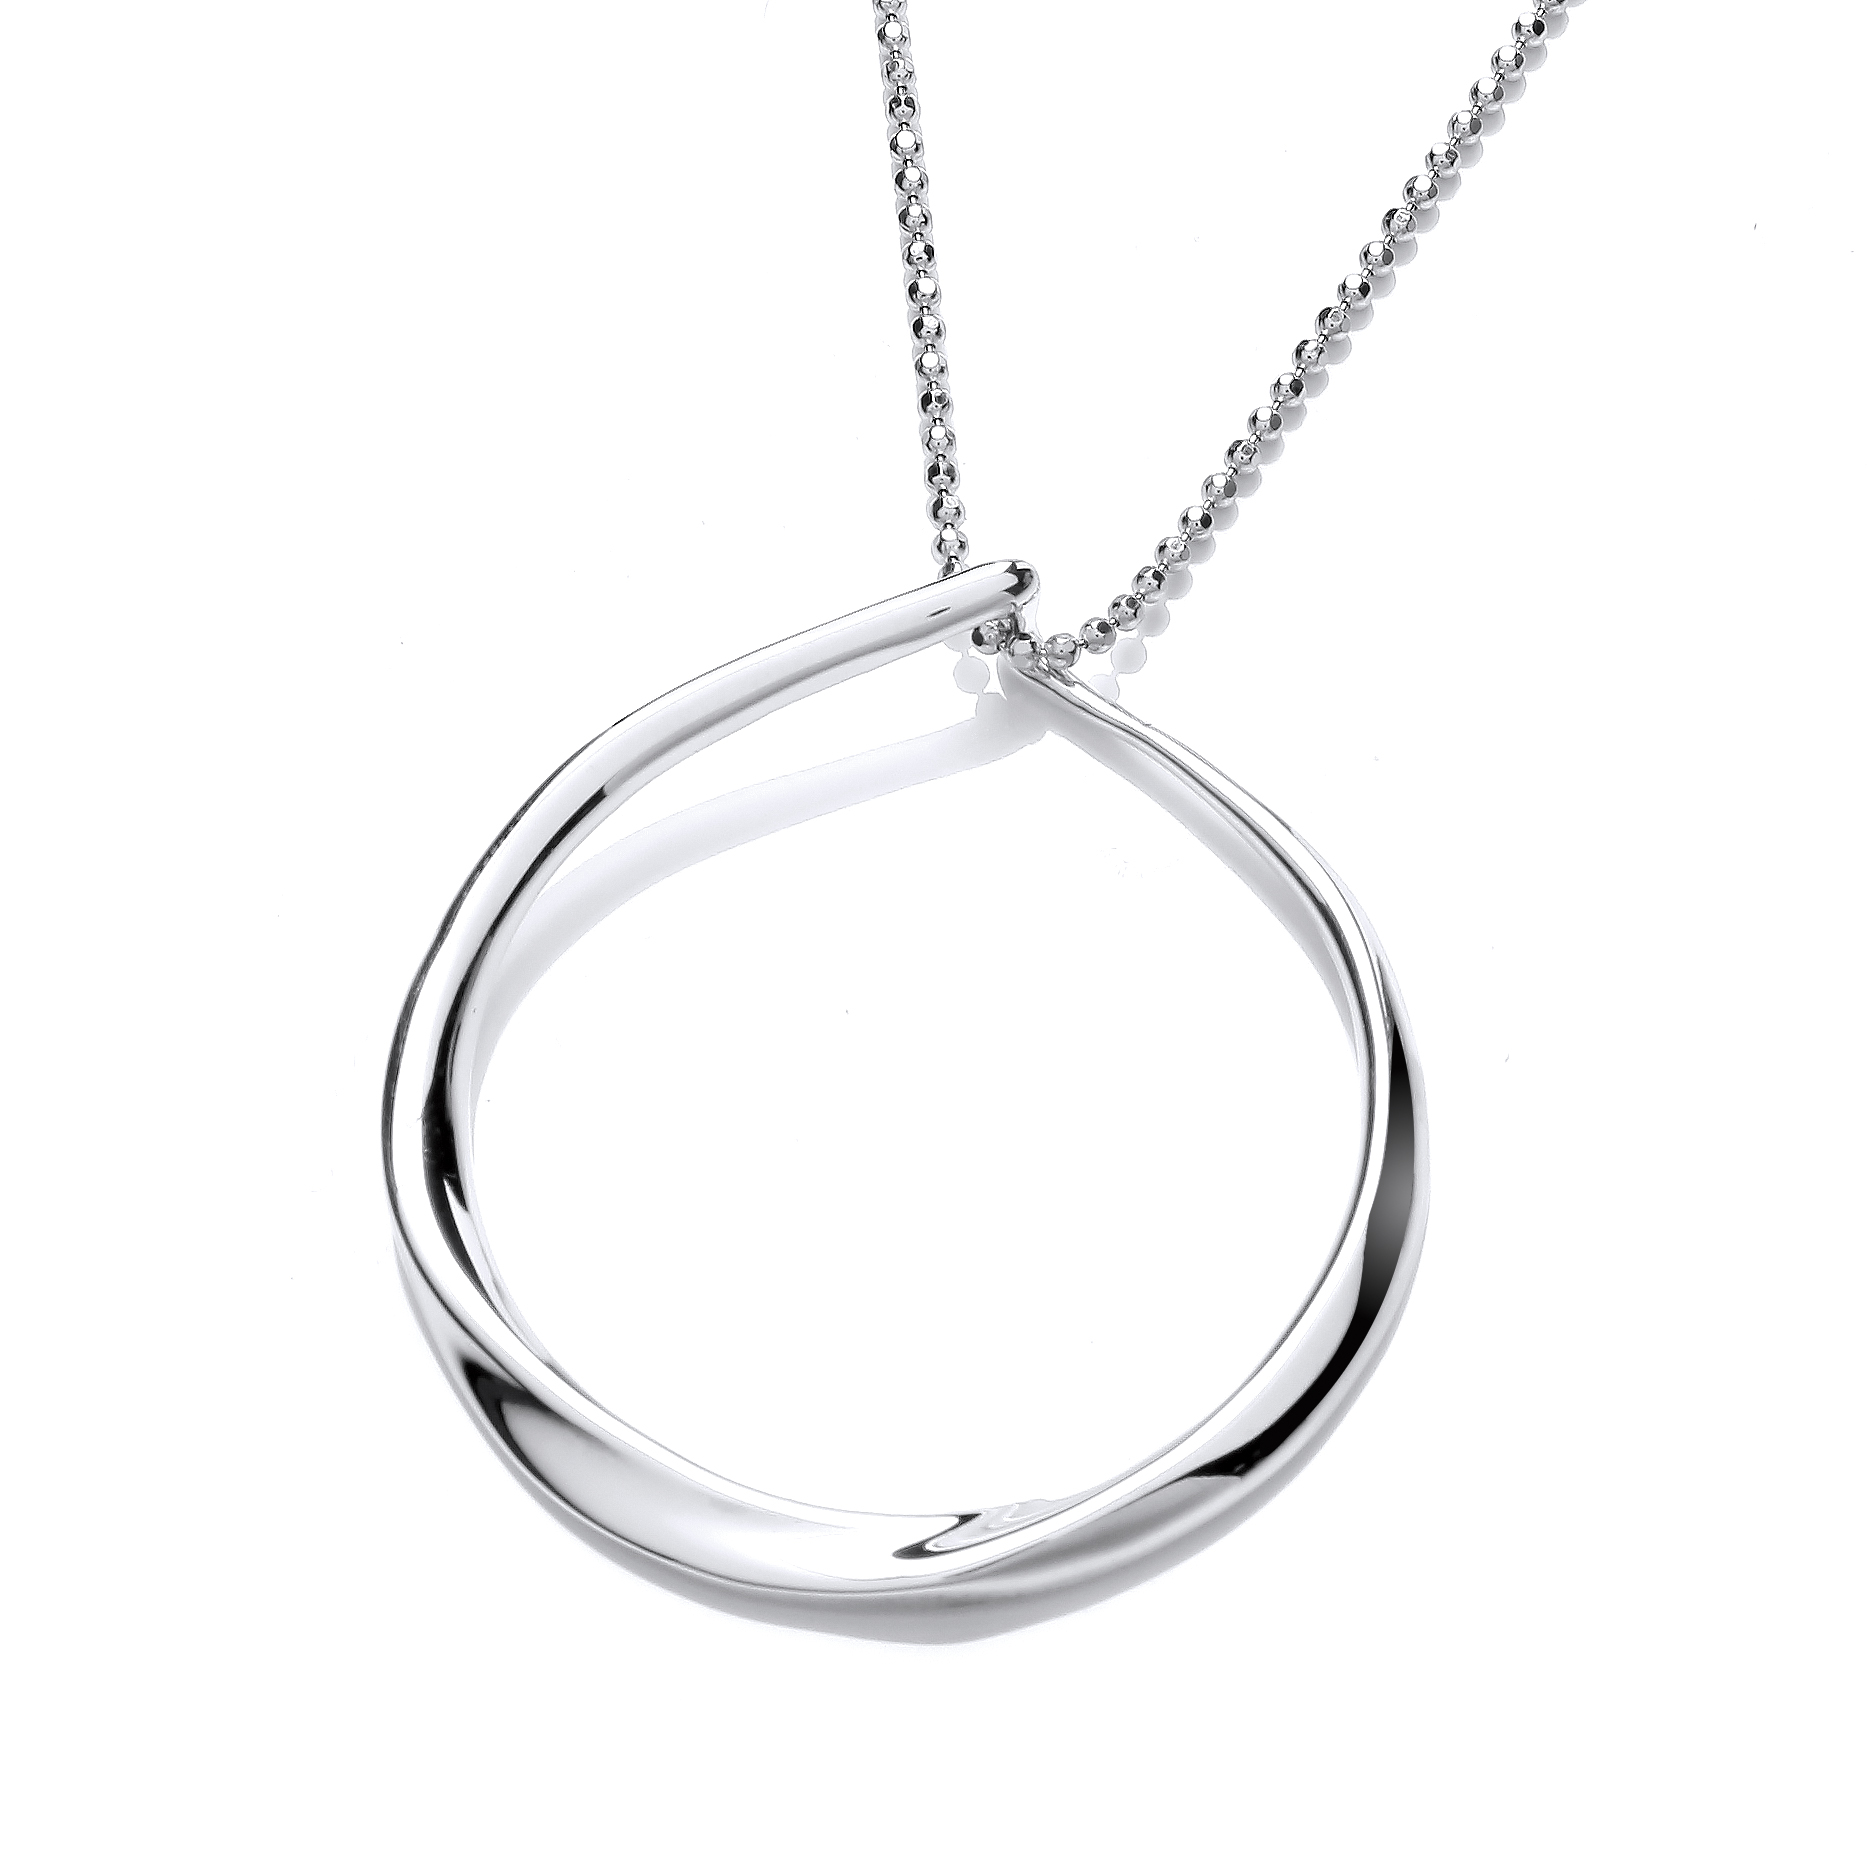 A sterling silver twisted circle pendant